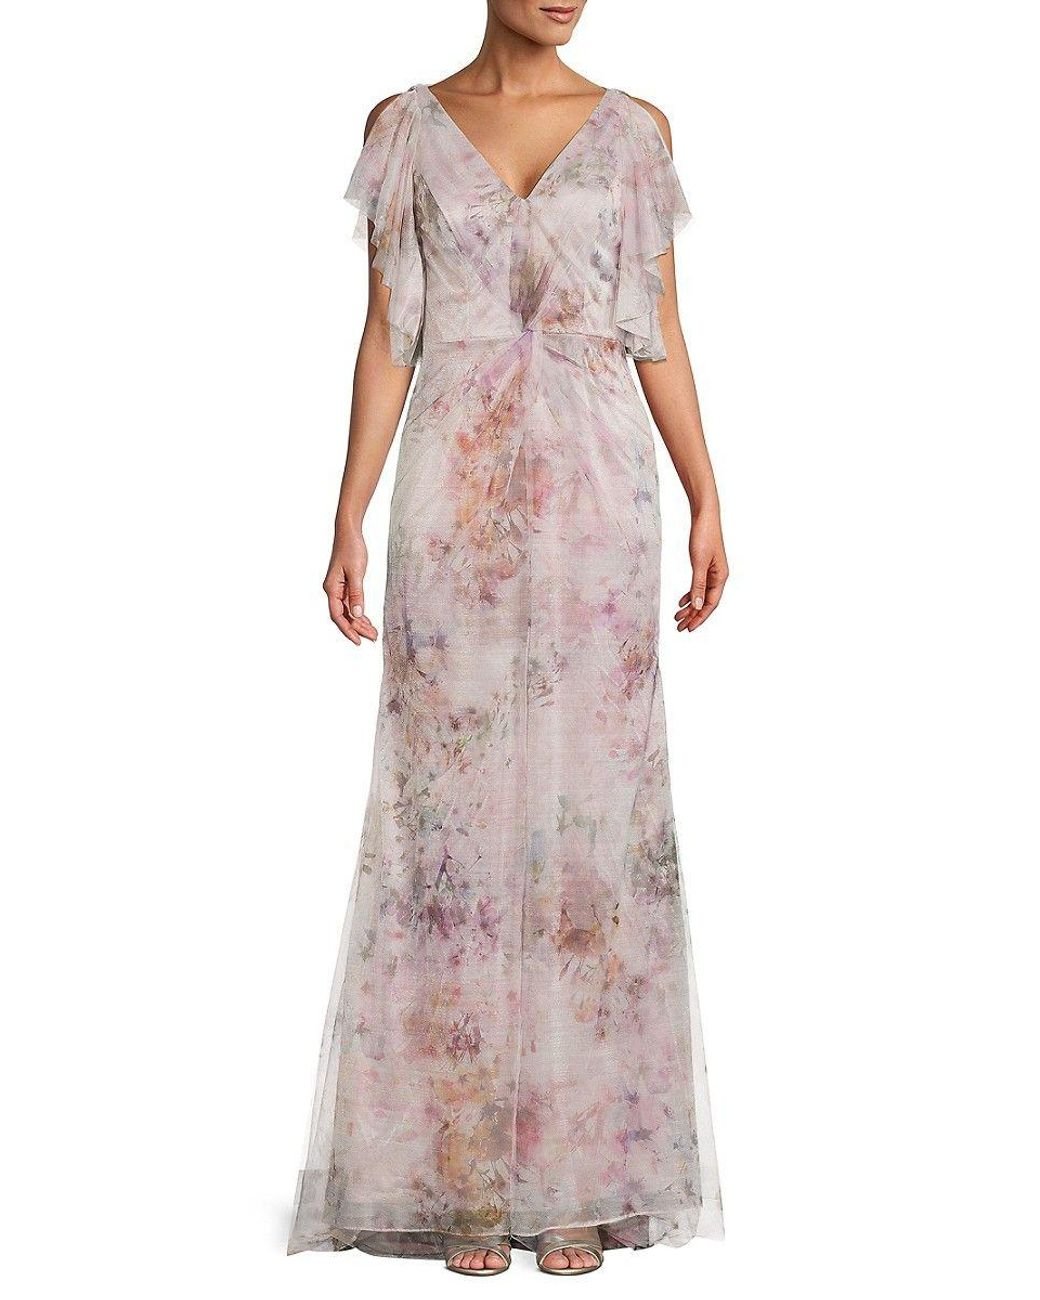 Rene Ruiz Collection Abstract Metallic Ruffle Gown in Pink | Lyst